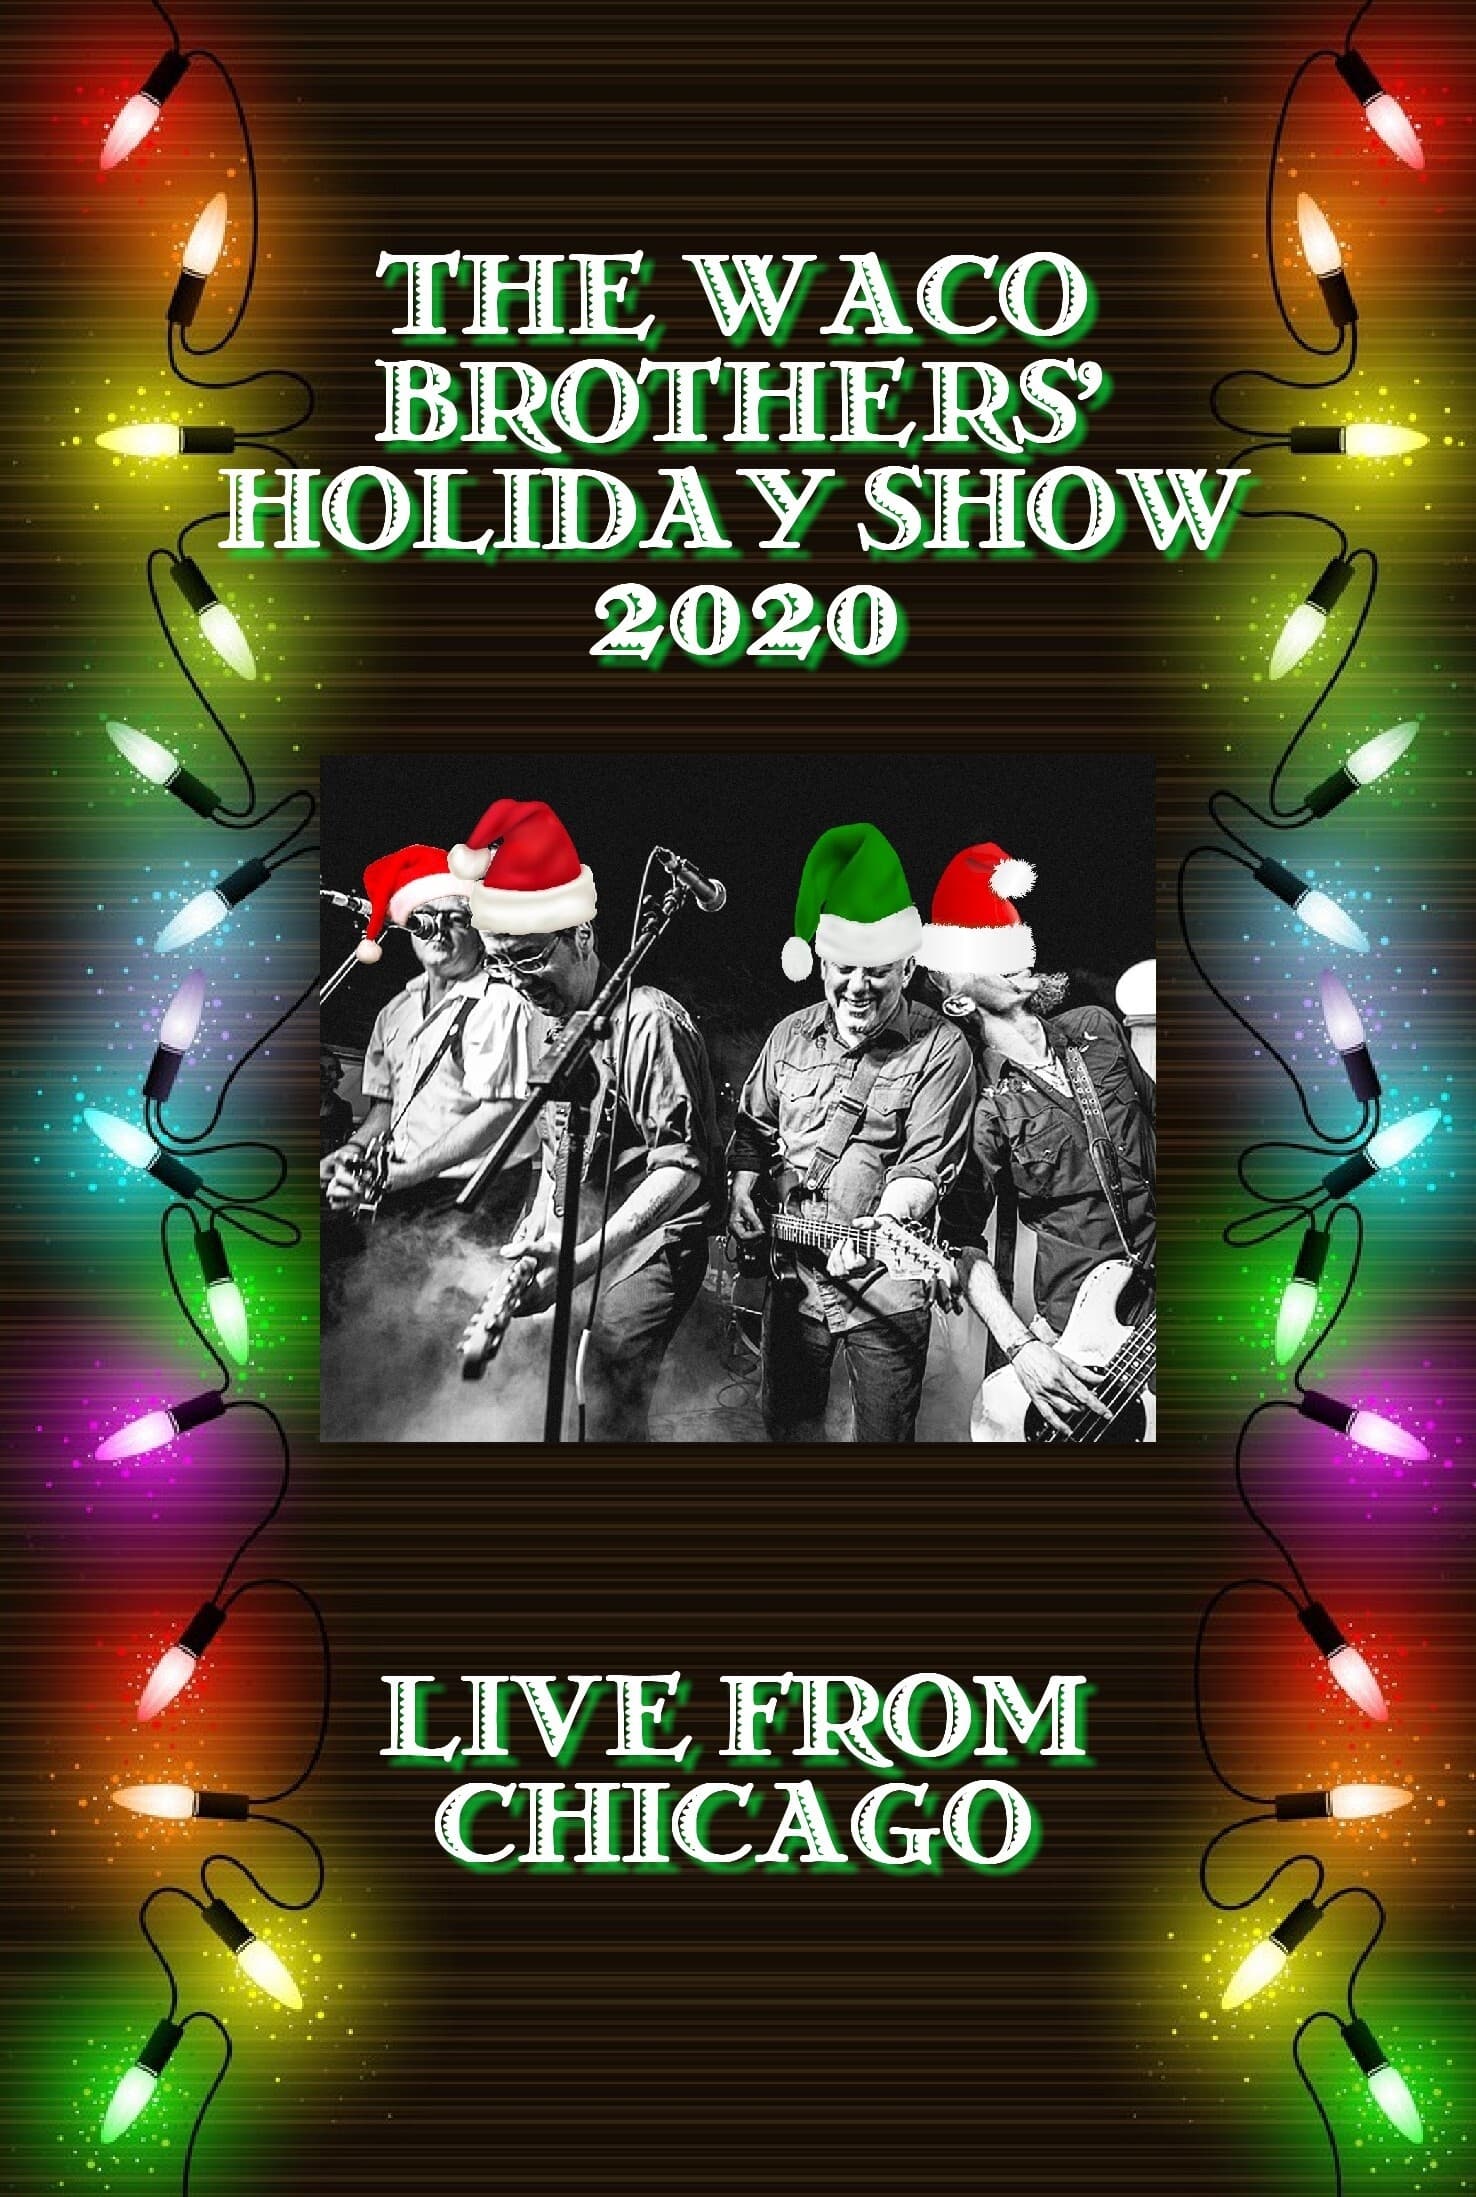 The Waco Brothers' Holiday Show